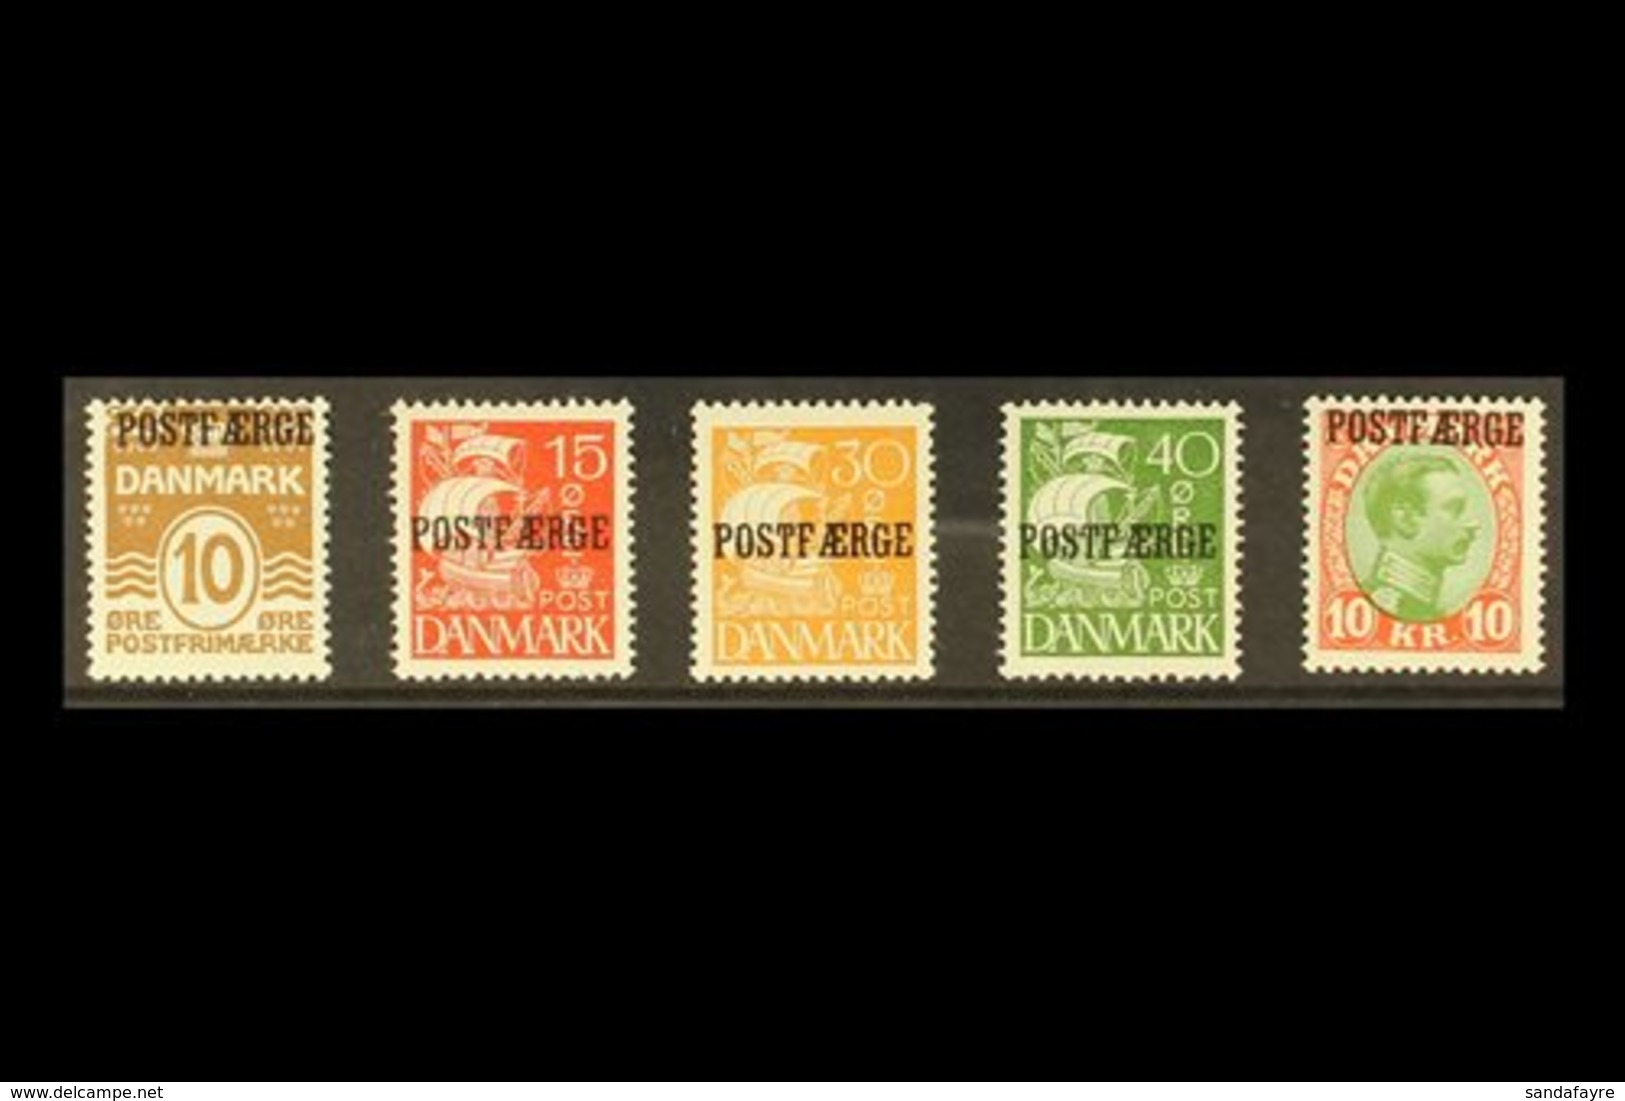 PARCEL POST  1927-30 10 Ore, 15 Ore, 30 Ore, 40 Ore, And 1kr With "POSTFAERGE" Overprints Complete Set, Michel 11/15, Ve - Other & Unclassified